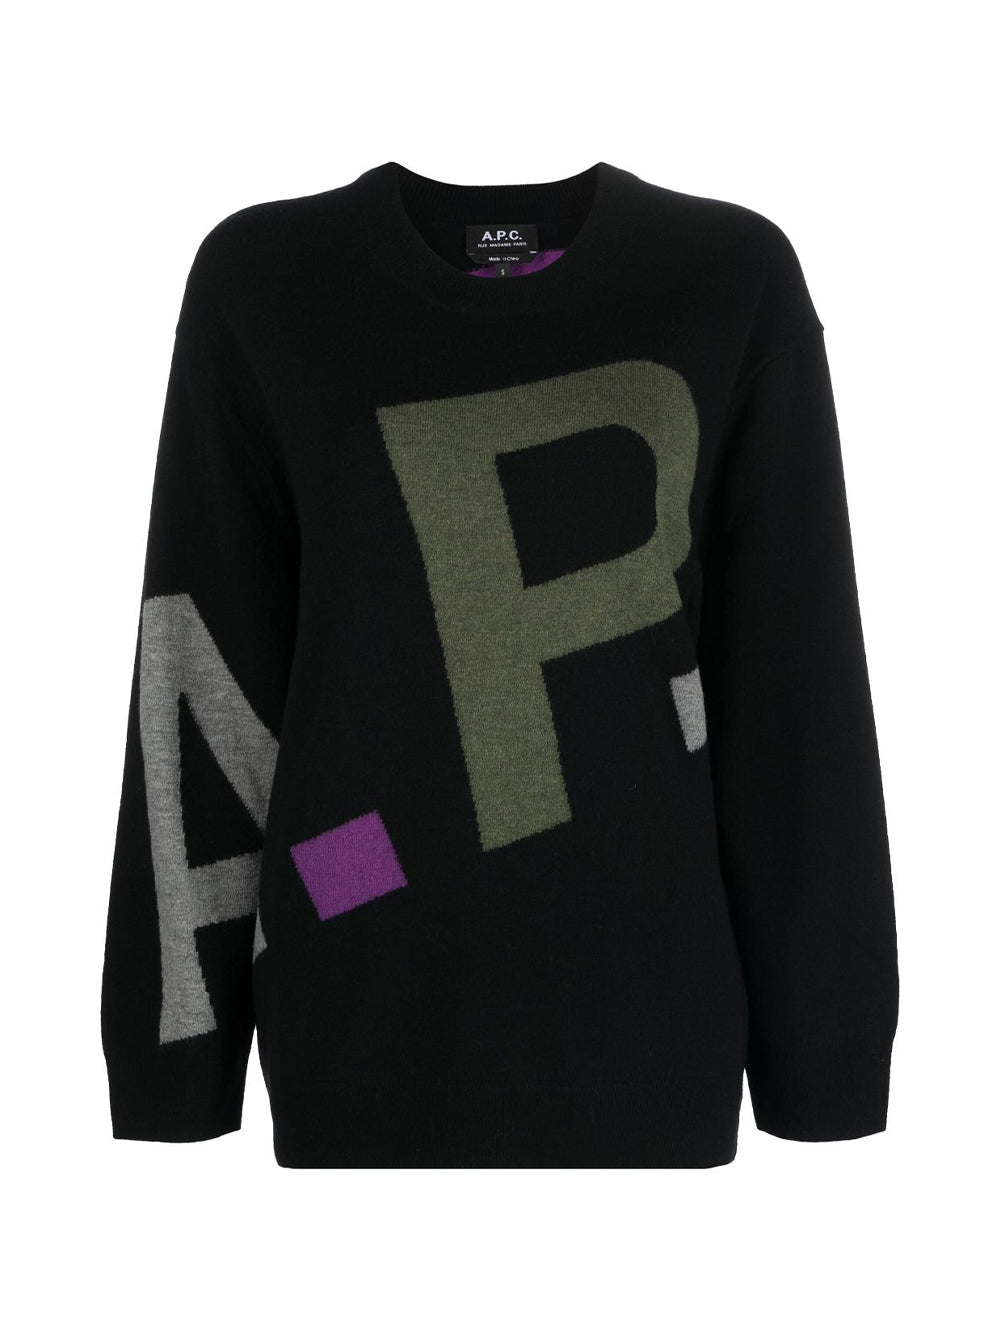 Pull Over A.P.C. Logo